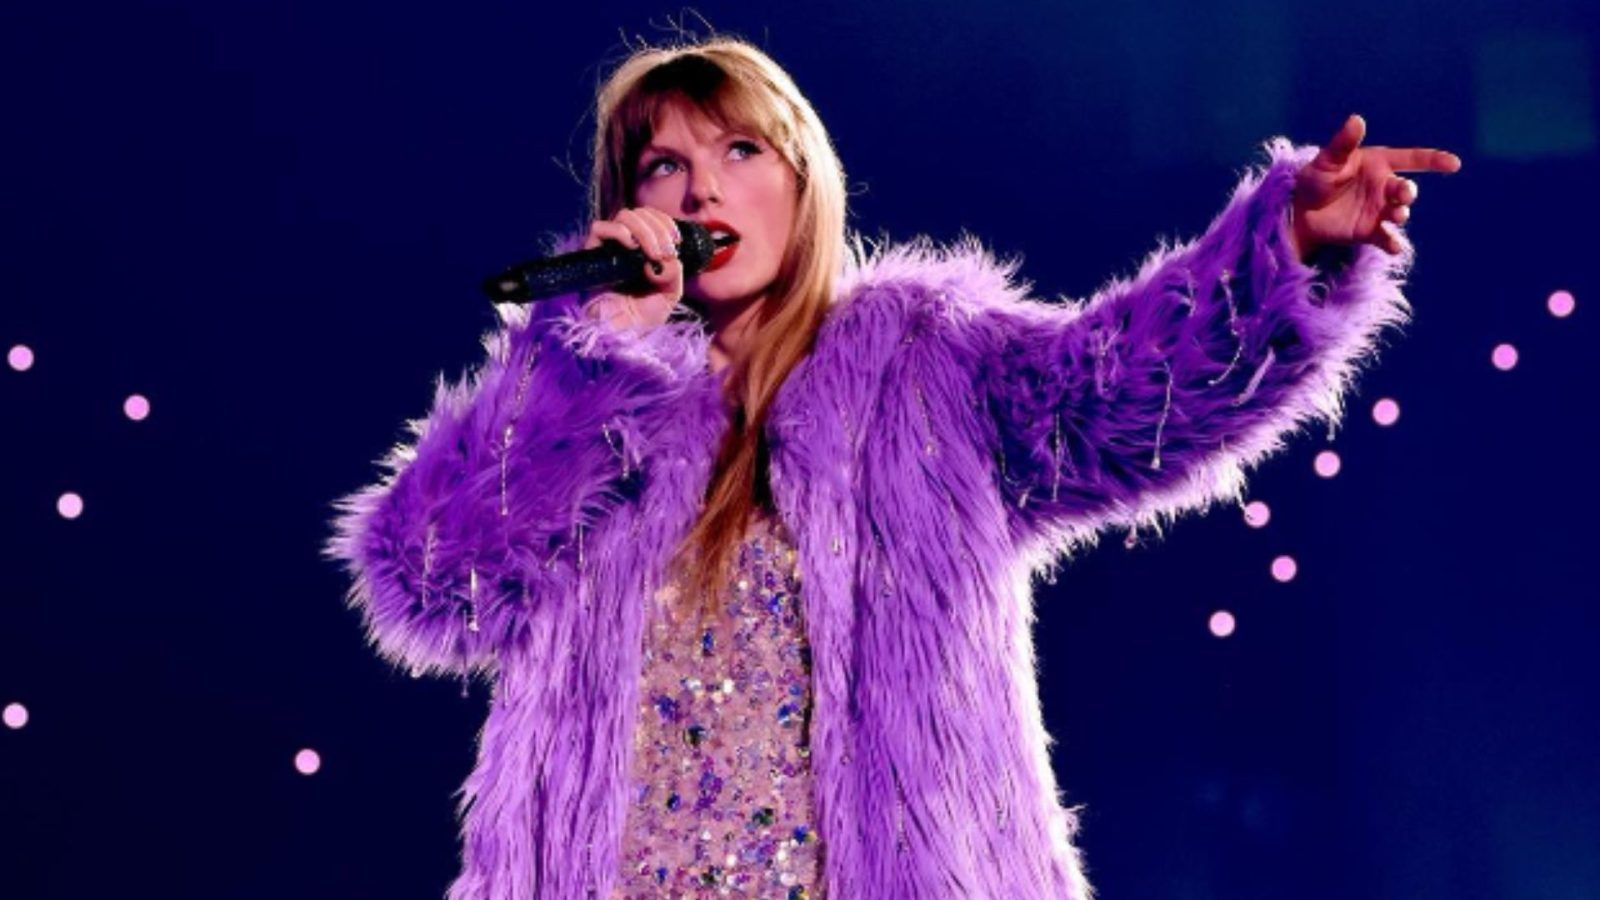 Grab Your Taylor Swift Eras Tour Tickets Today, by Piece Of Paper